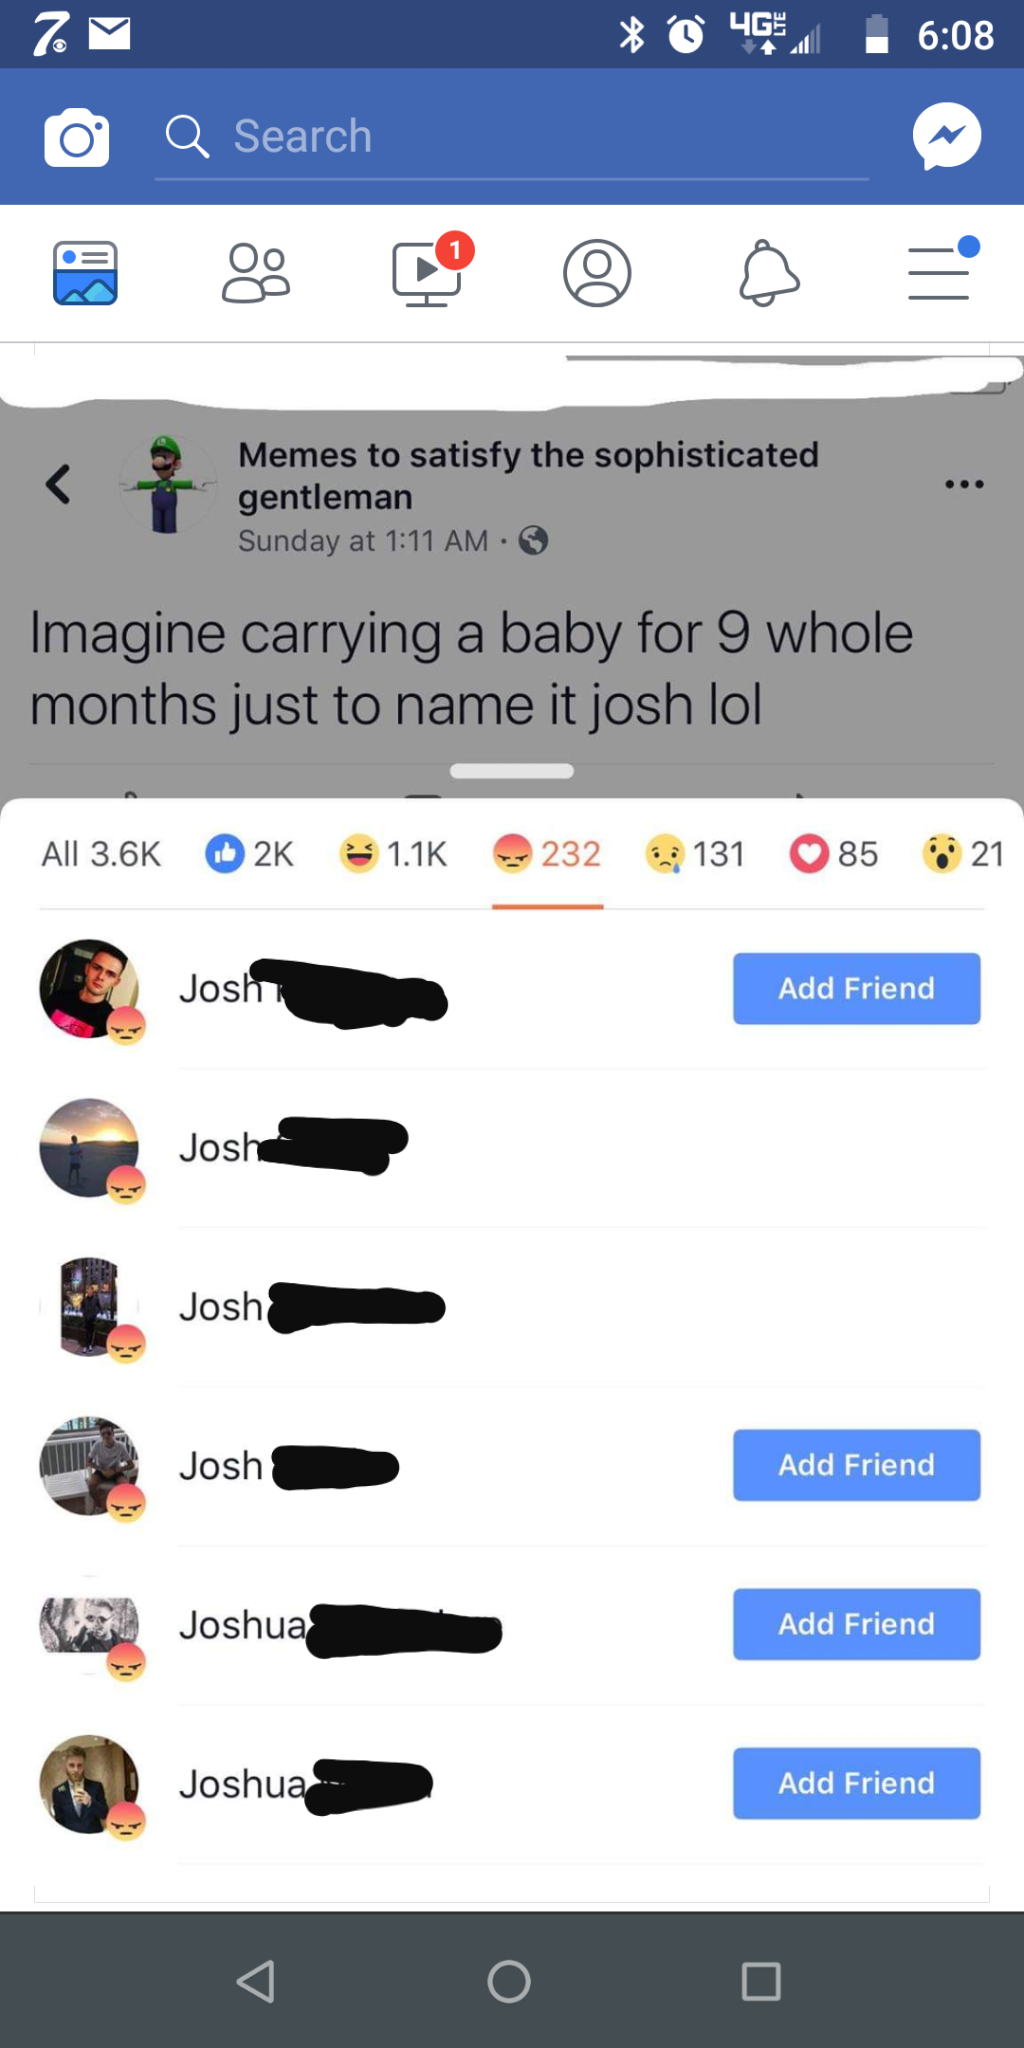 I think Josh is offended